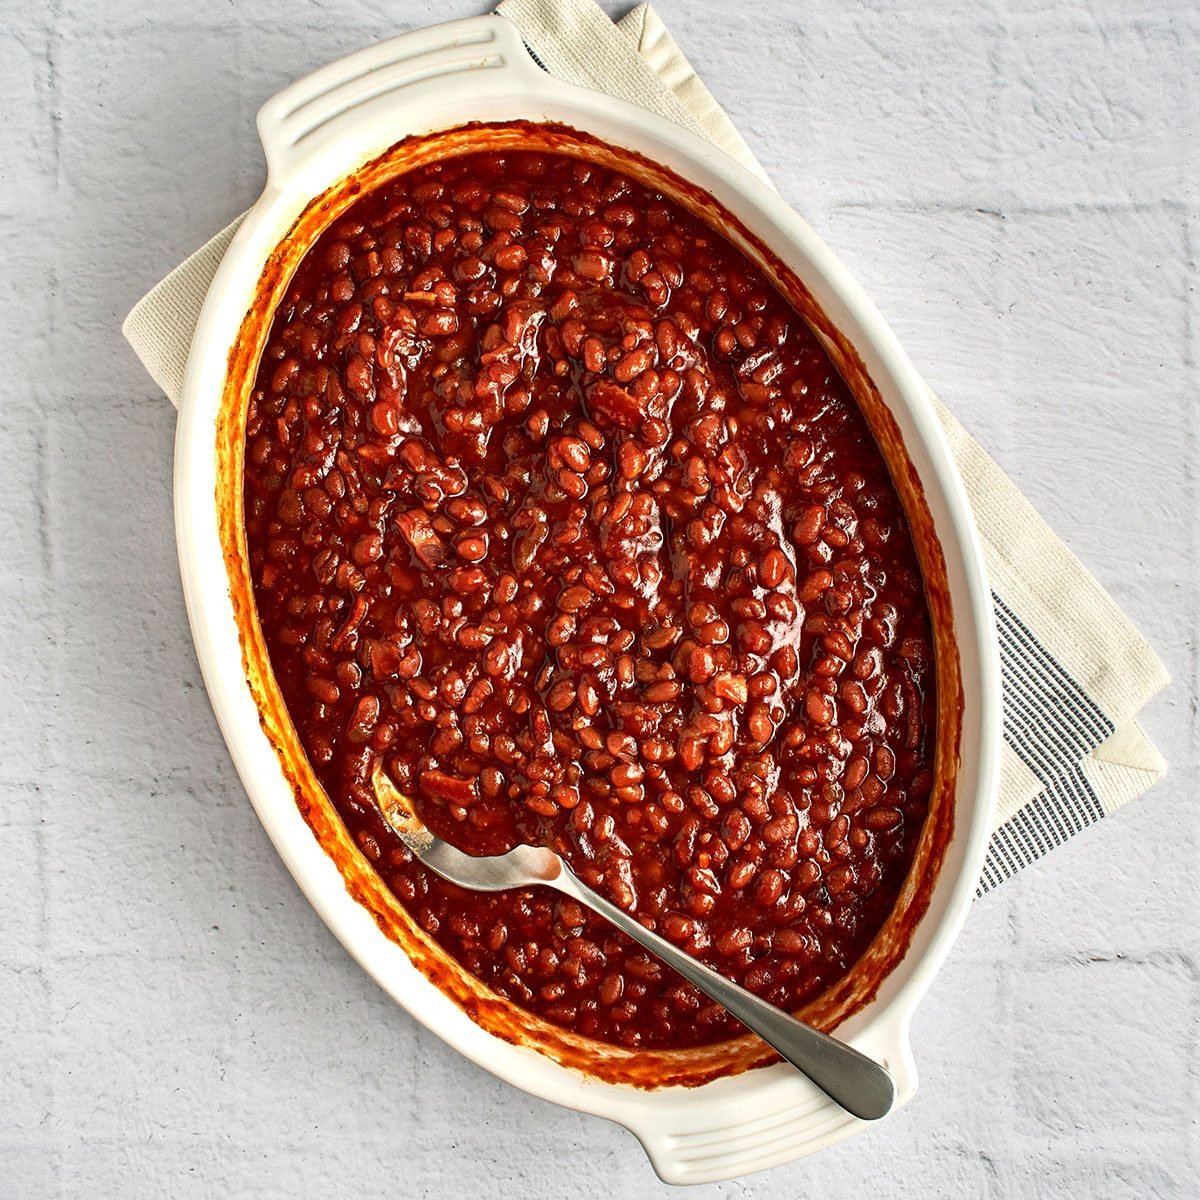 These baked beans with bacon by Taste of Home will round out any meal, but they're particularly good served alongside cornbread.